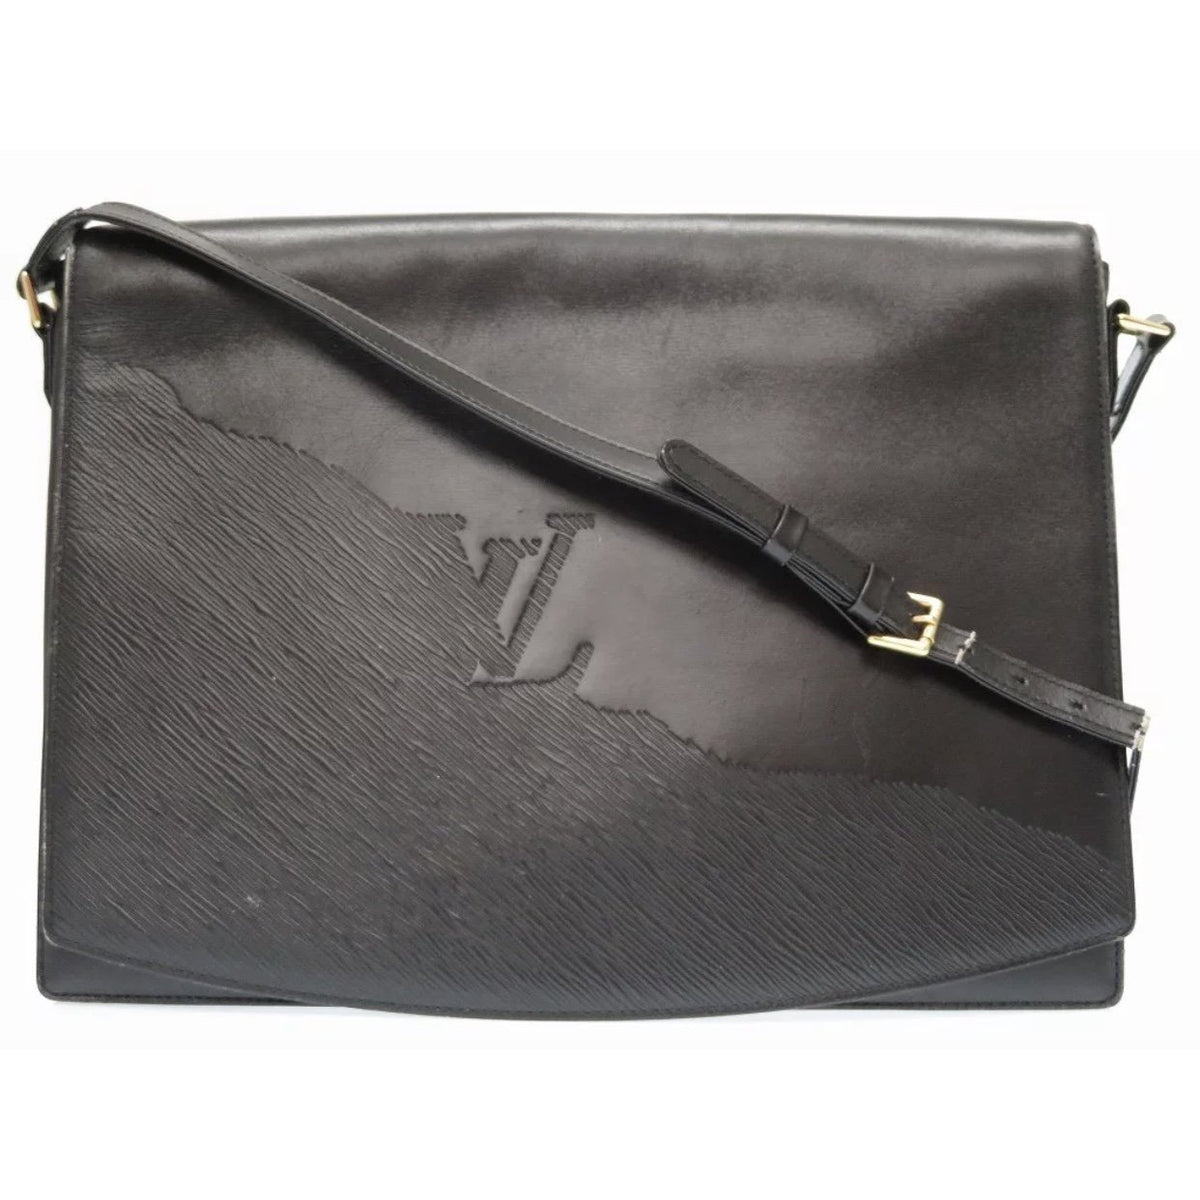 Louis Vuitton Gris/Black Monogram Embossed and Patent Leather